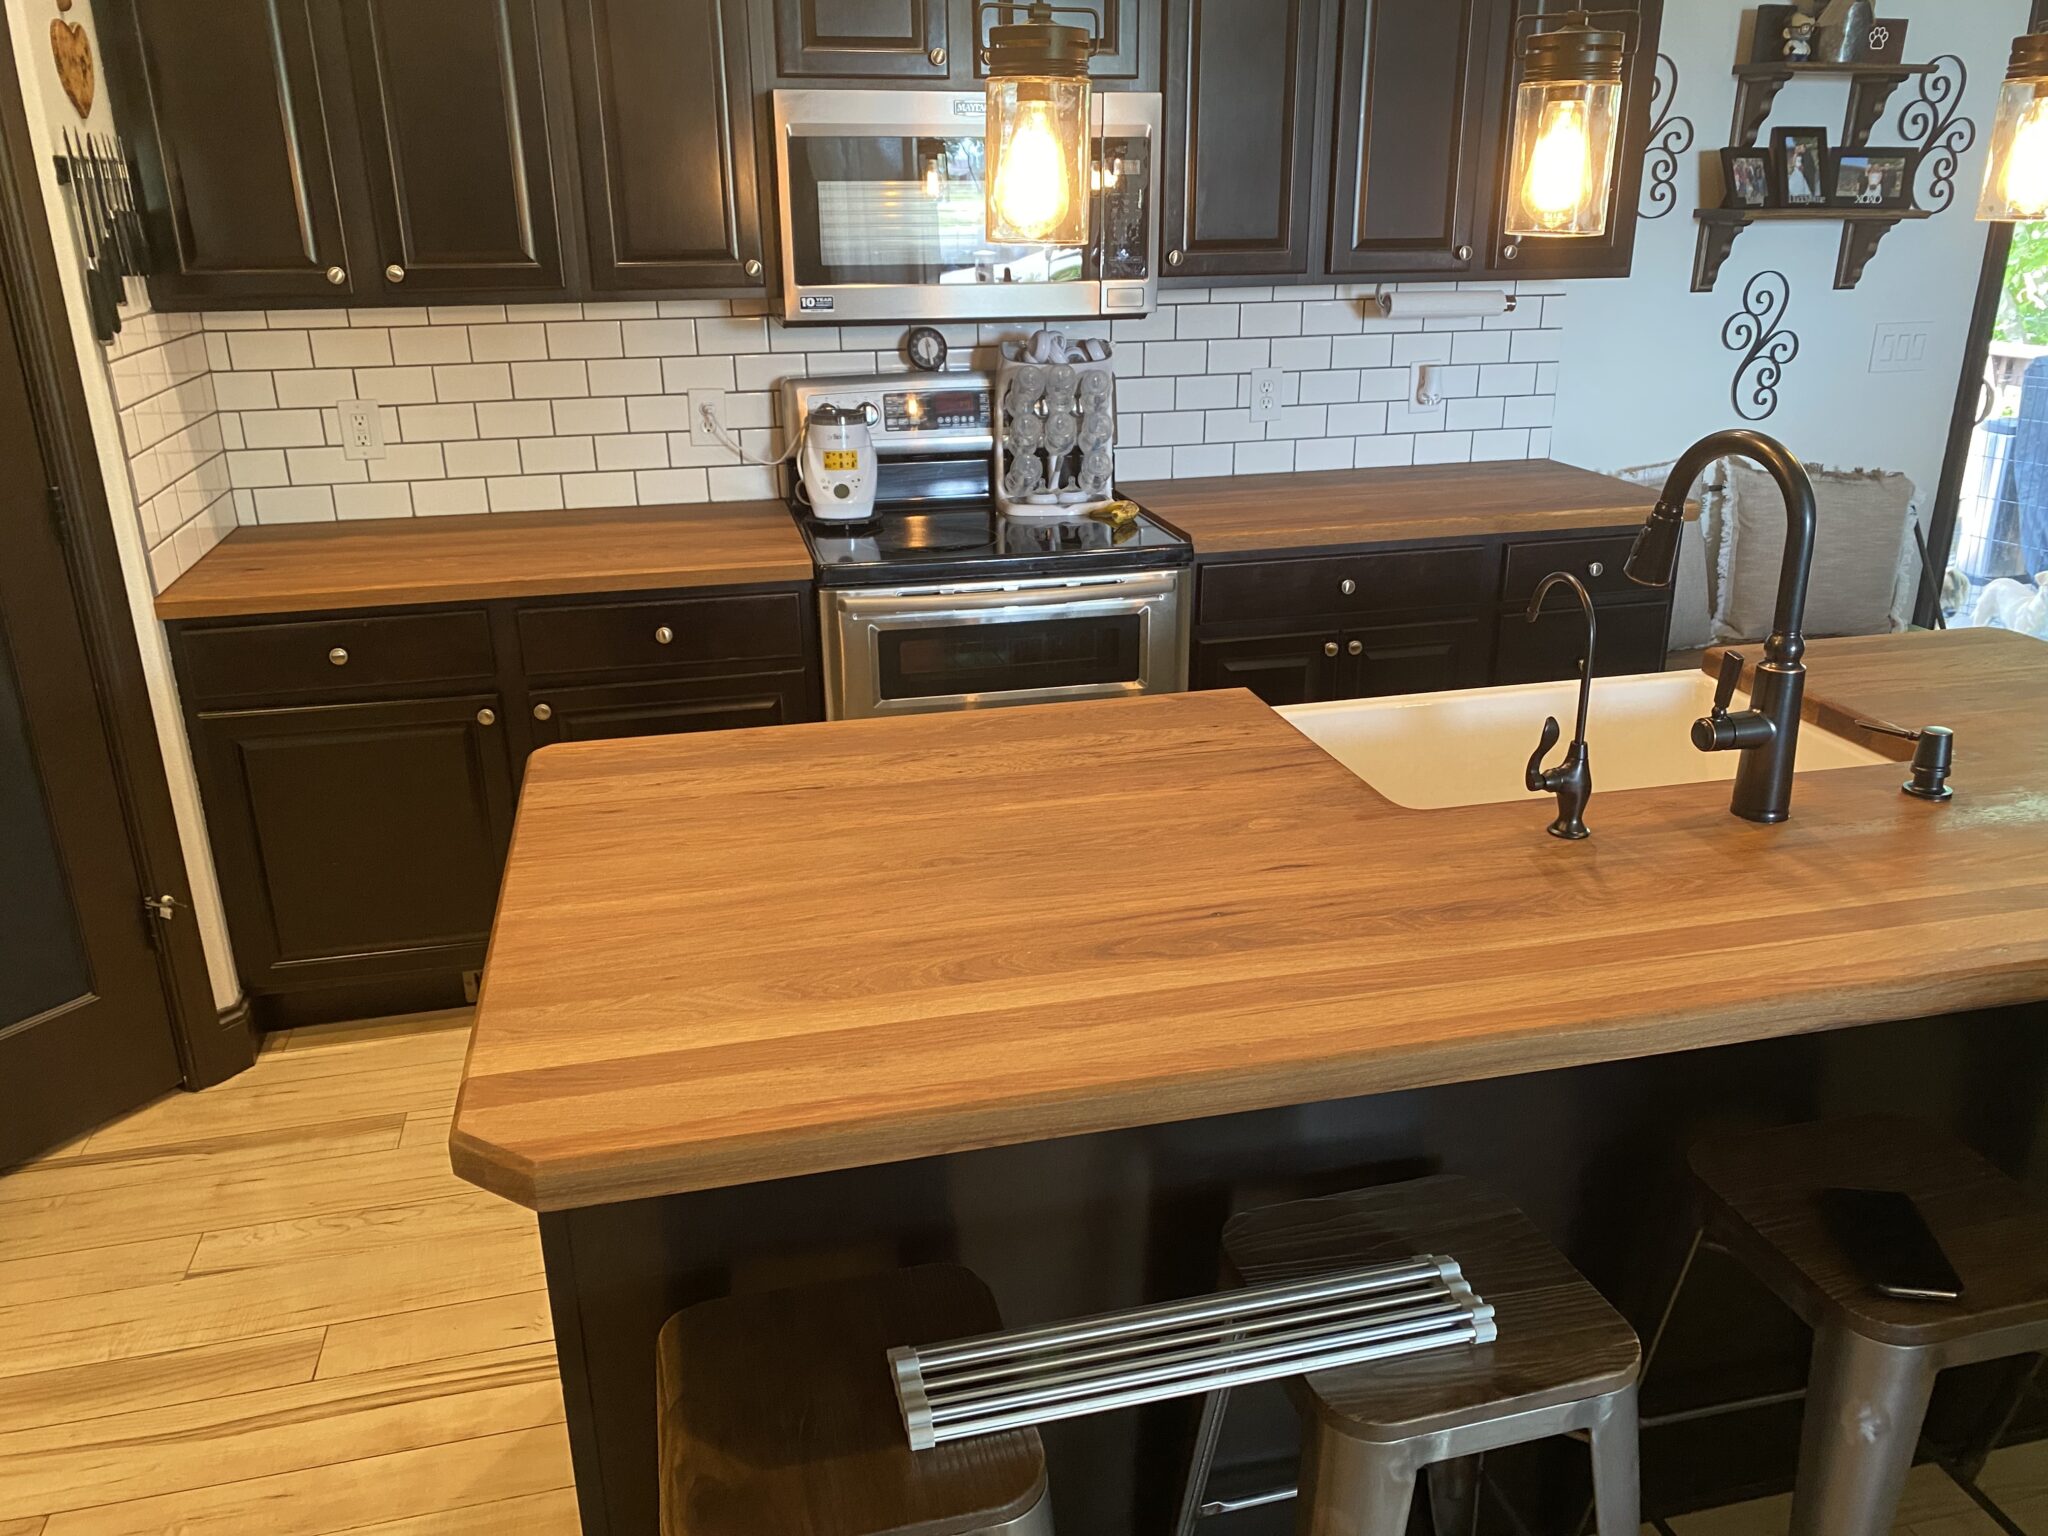 How to Finish Butcher Block Countertops - Part 2 - SMW Designs